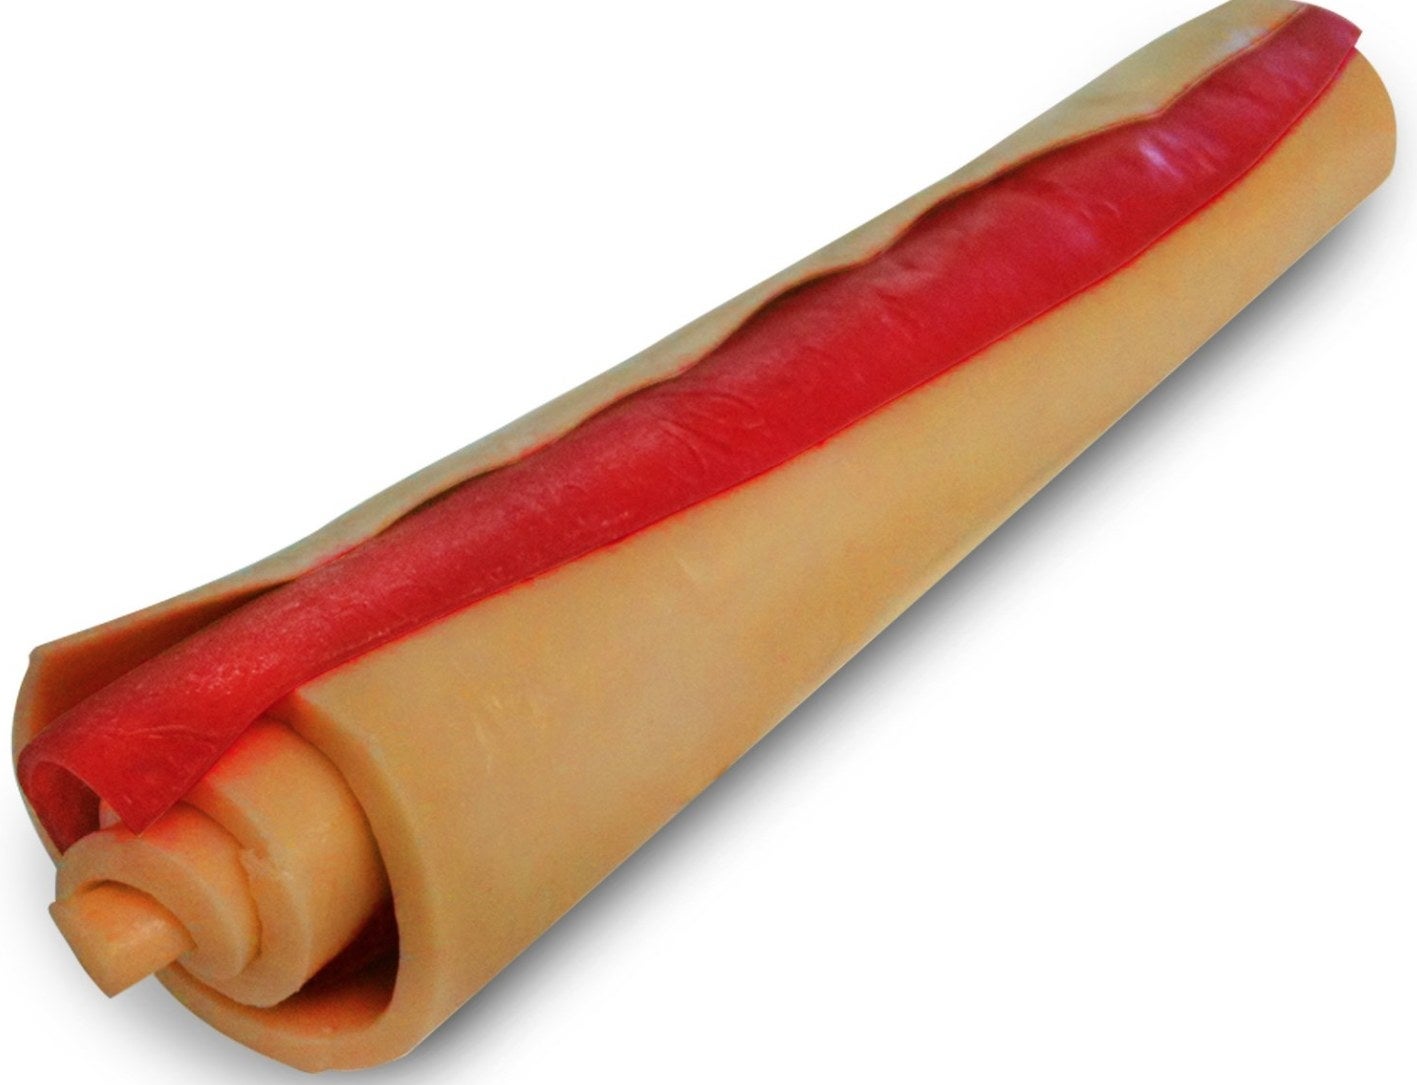 A brown and red chew stick for dogs